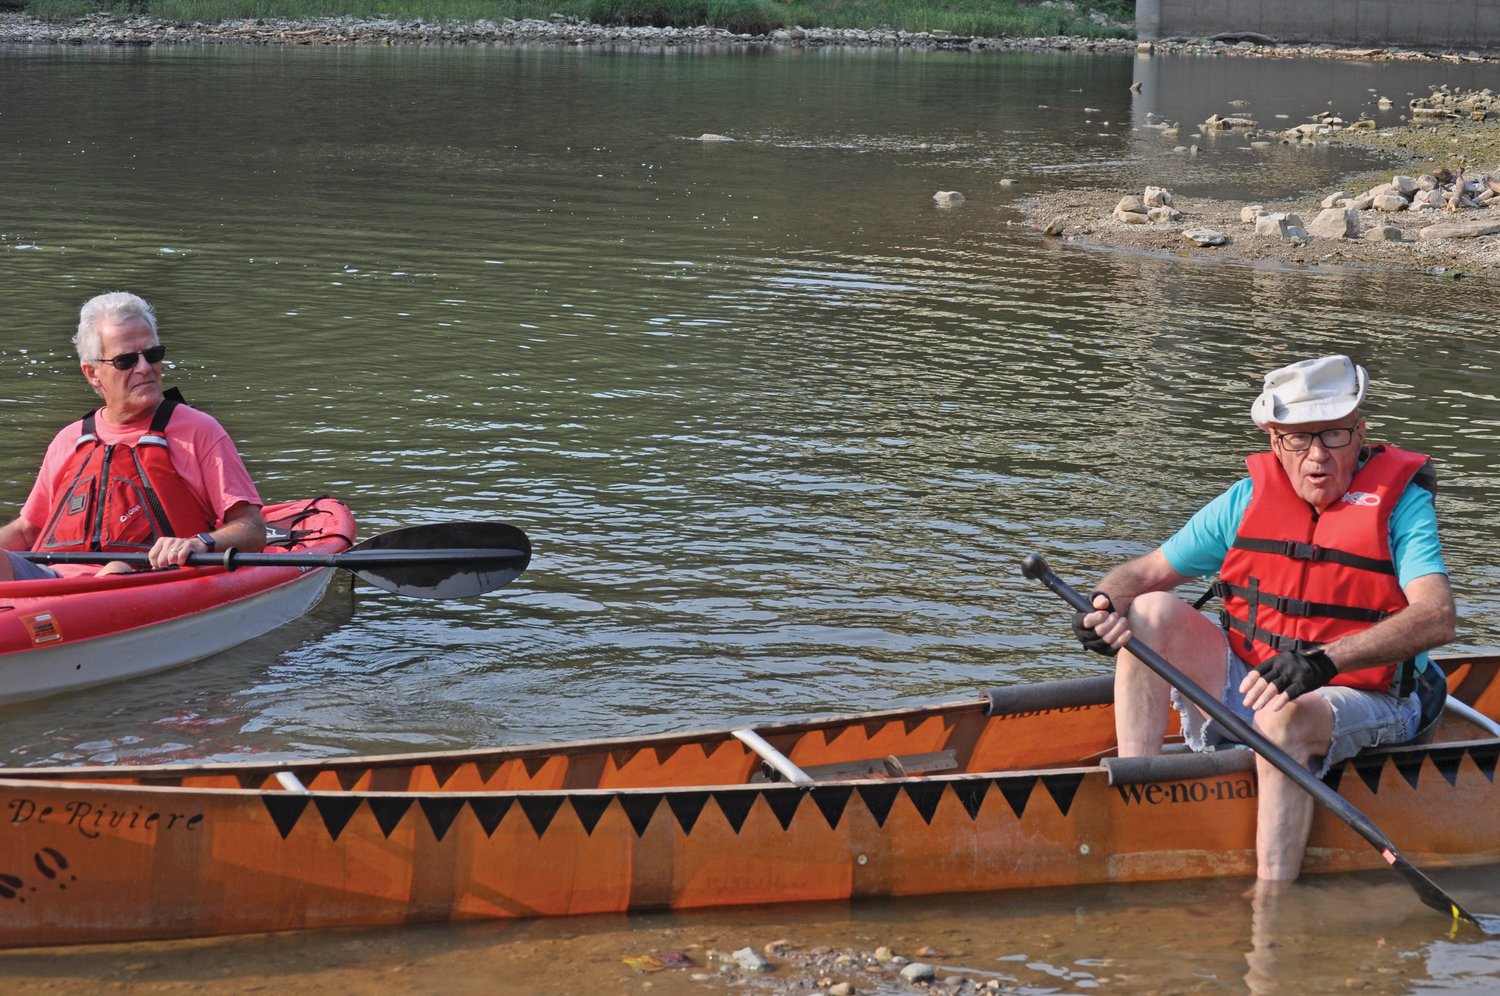 Bob Stwalley, right, talks to people gathered on the banks of Sugar Creek on Monday as Friends of Sugar Creek President Ed Fain looks on. Stwalley paddled through the old lowhead dam site.